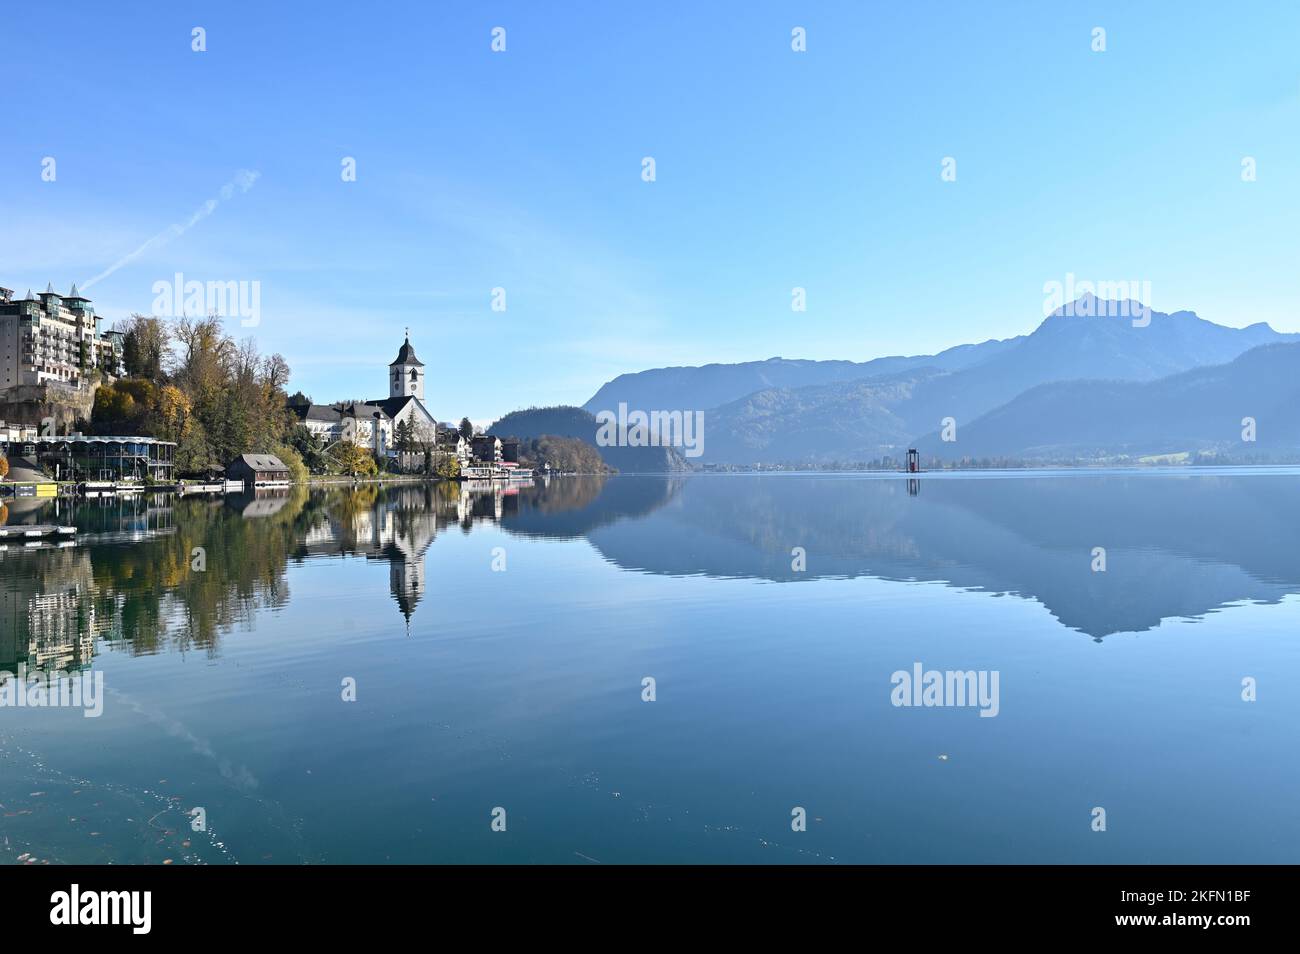 St. Wolfgang at the Wolfgangsee, Upper Austria, Austria. View of St. Wolfgang and Lake WolfgangLandscape Stock Photo